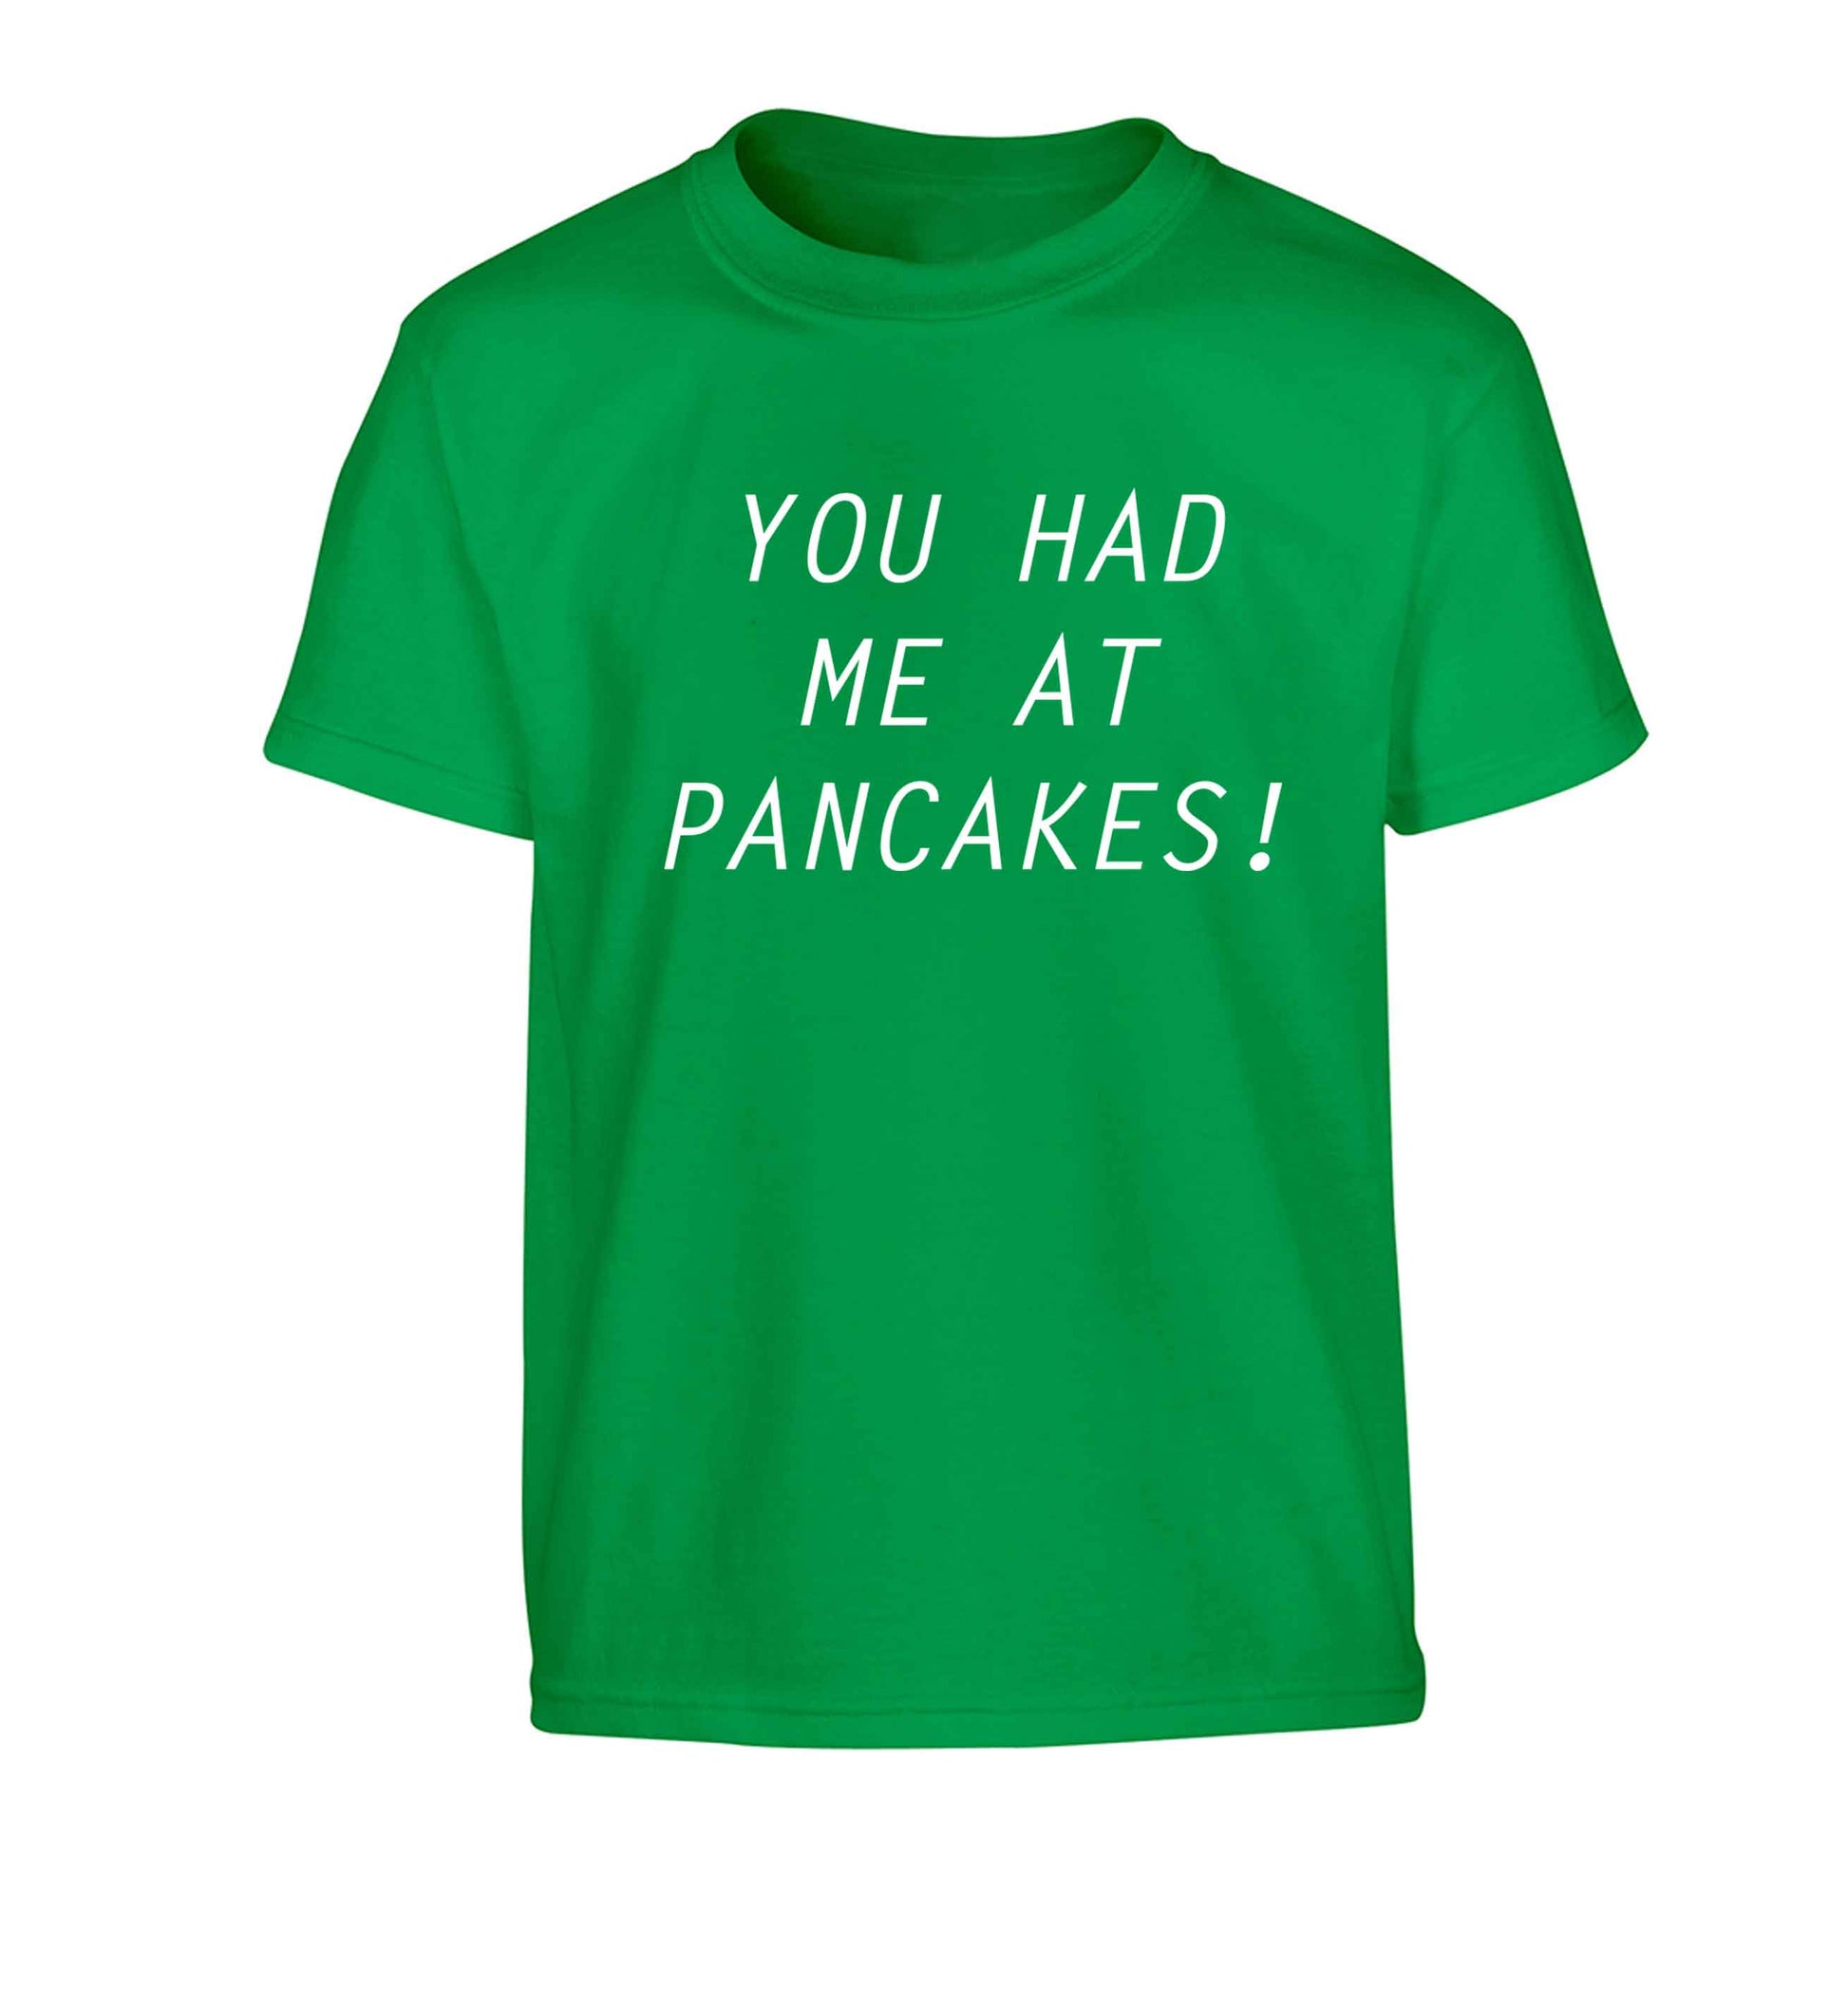 You had me at pancakes Children's green Tshirt 12-13 Years